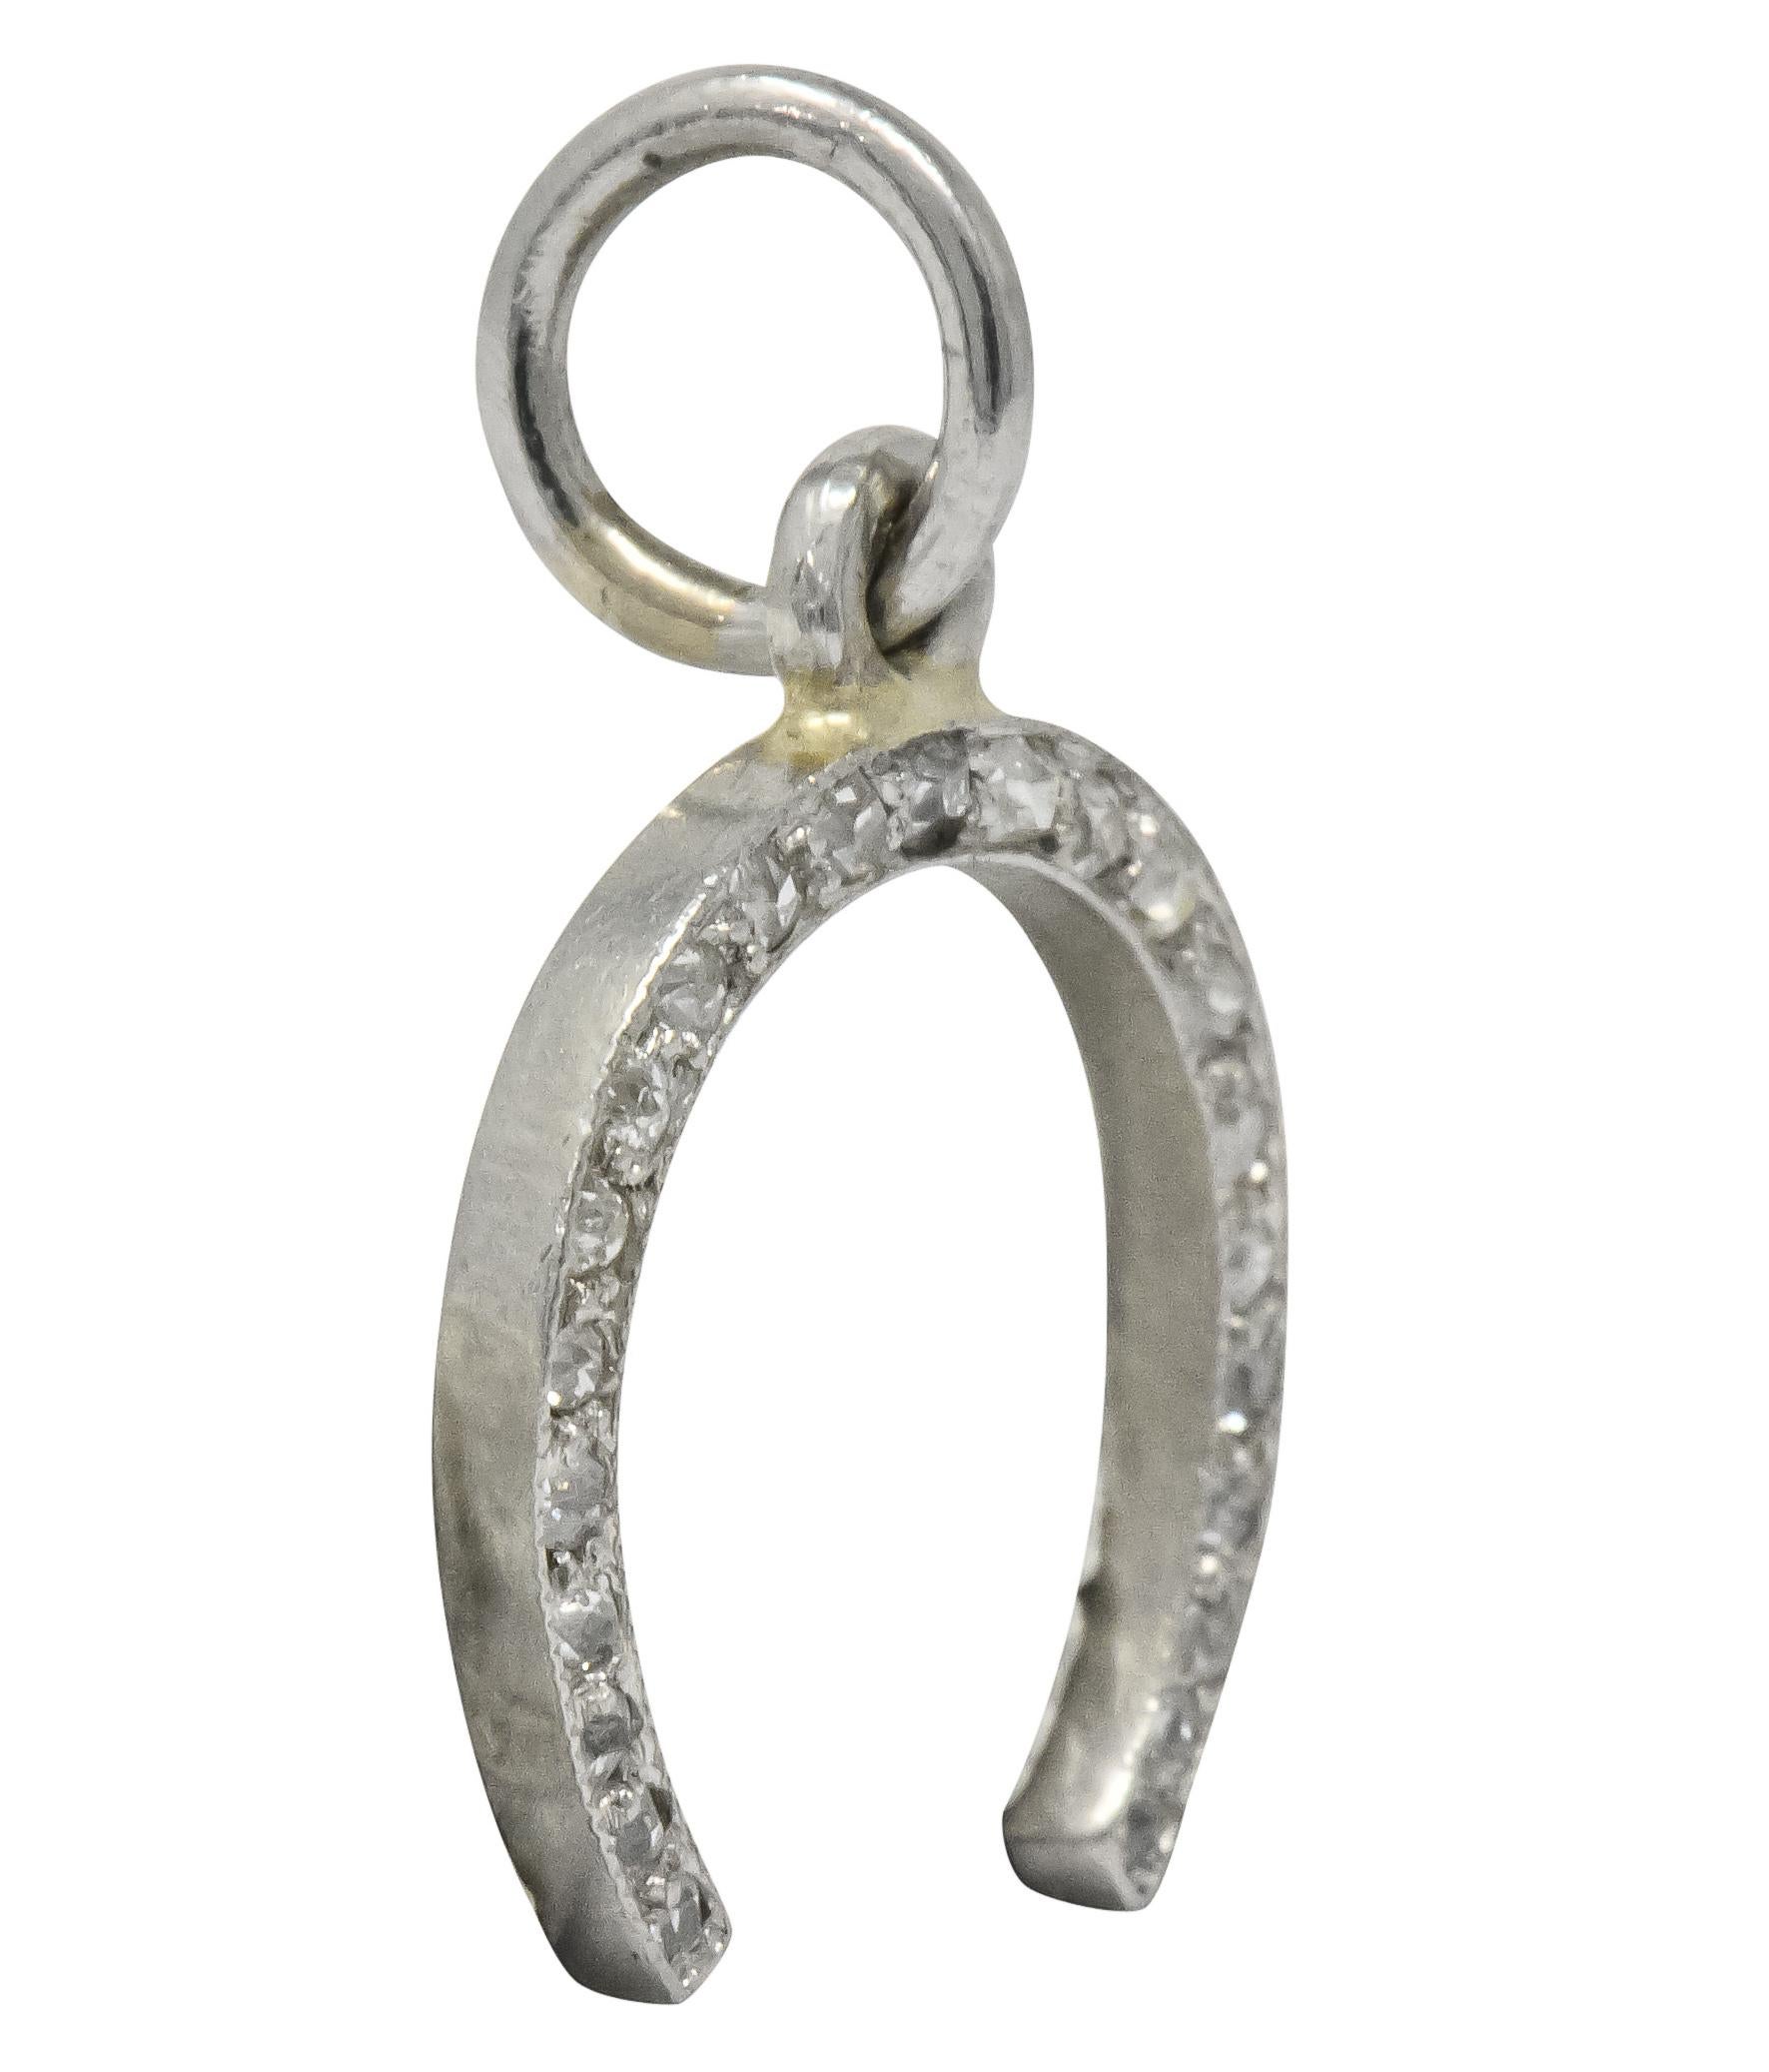 Horseshoe charm bead set with rose cut and Swiss cut diamonds weighing approximately 0.37 carat total, H to I color and SI clarity

With millegrain edge 

Completed by jump-ring

Tested as platinum

Circa 1920

Measures: 5/8 x 3/4 (including bale)